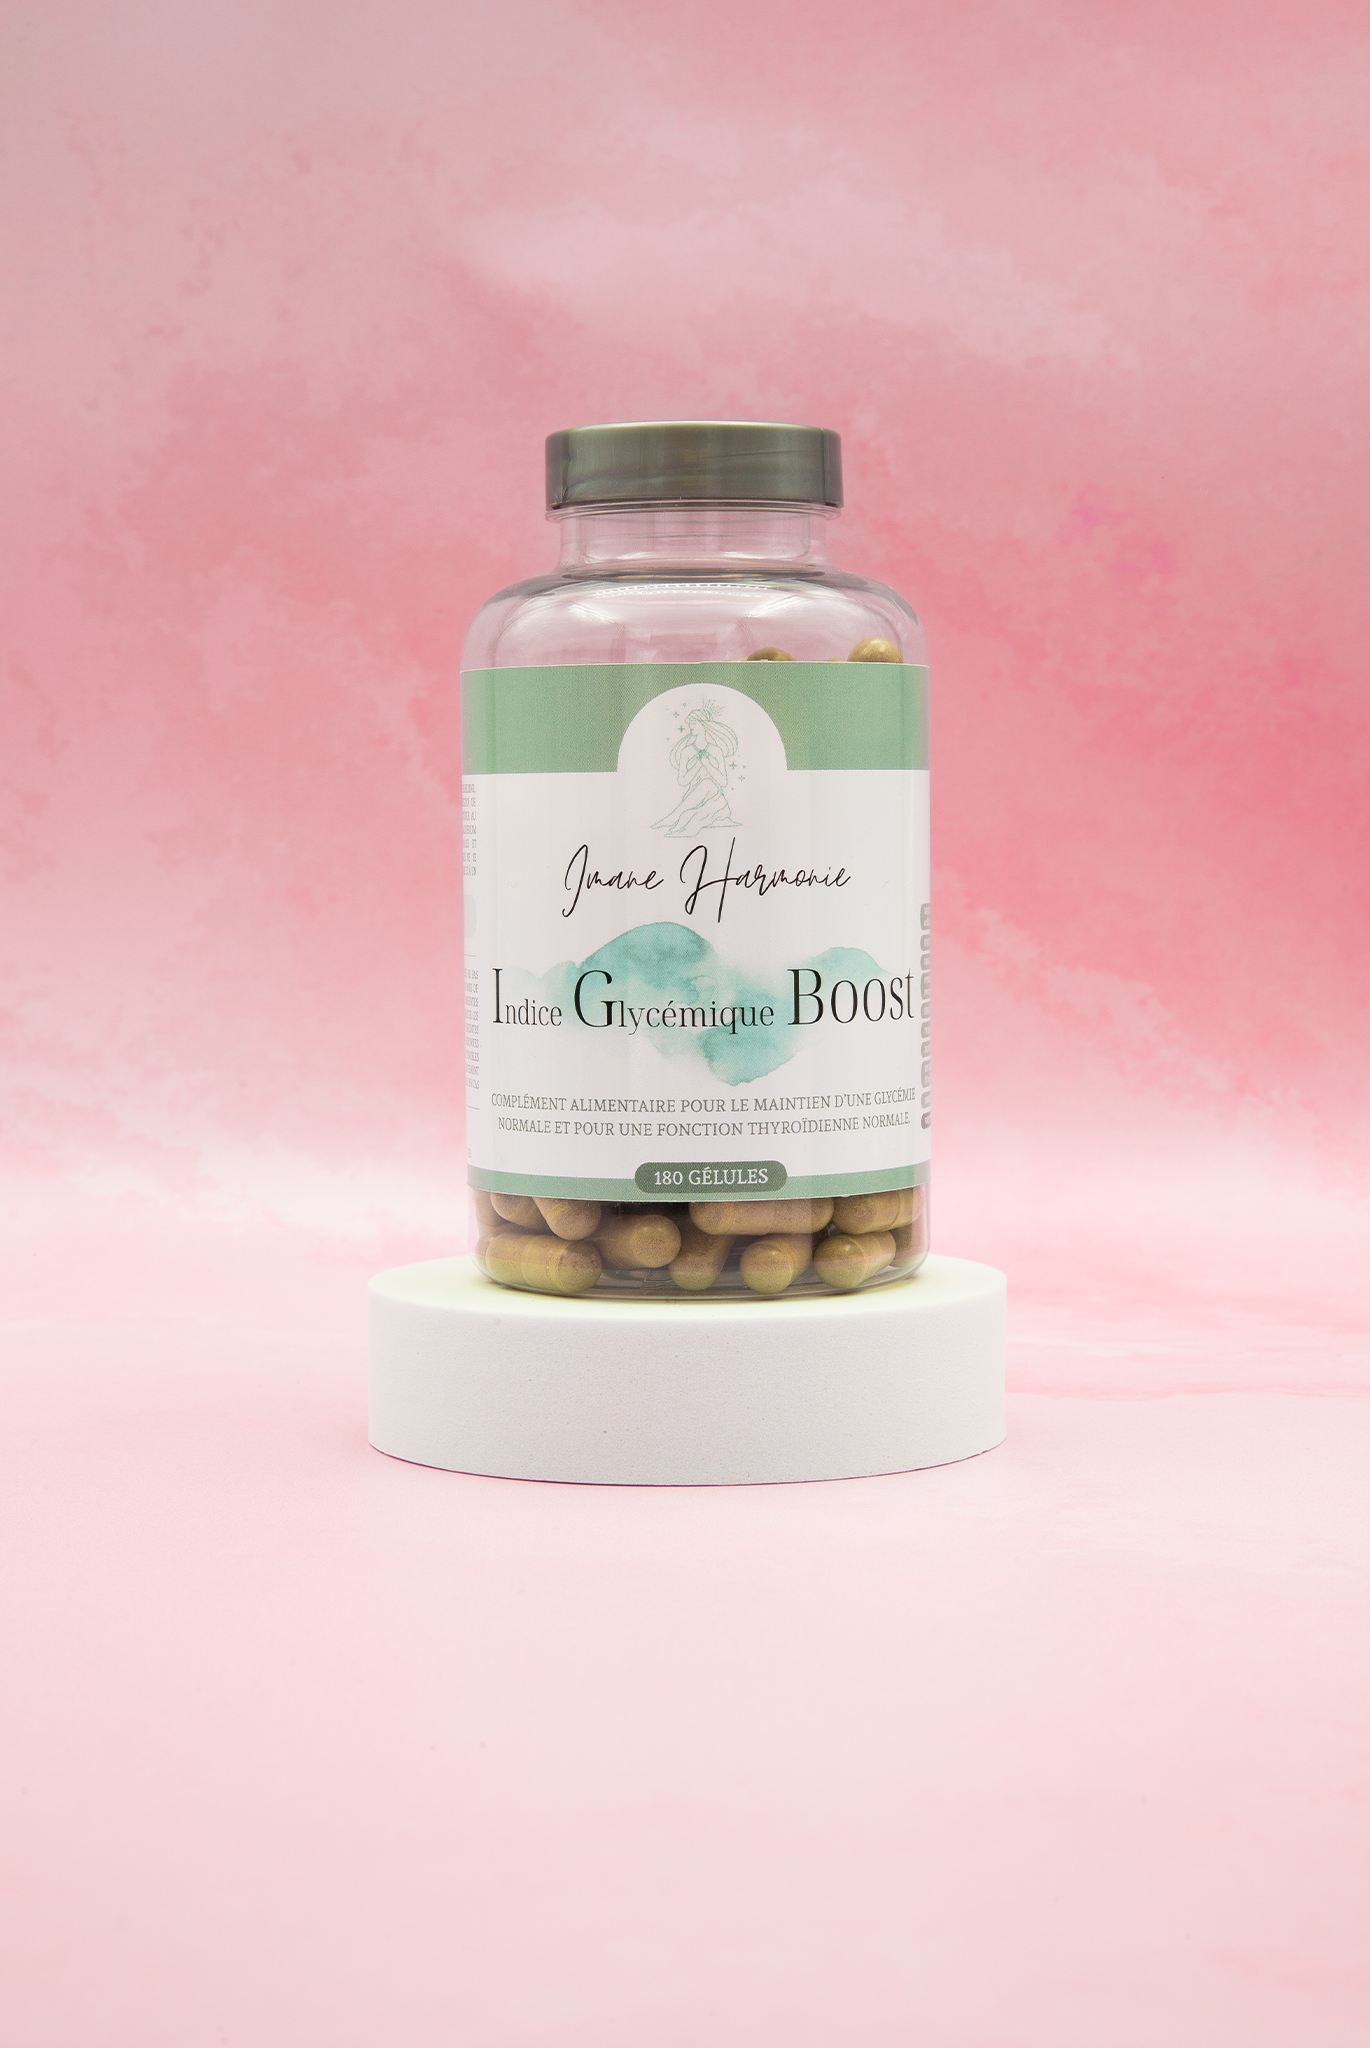 Indice Glycémique Boost is a dietary supplement designed to regulate blood sugar levels, specifically for individuals with Polycystic Ovary Syndrome